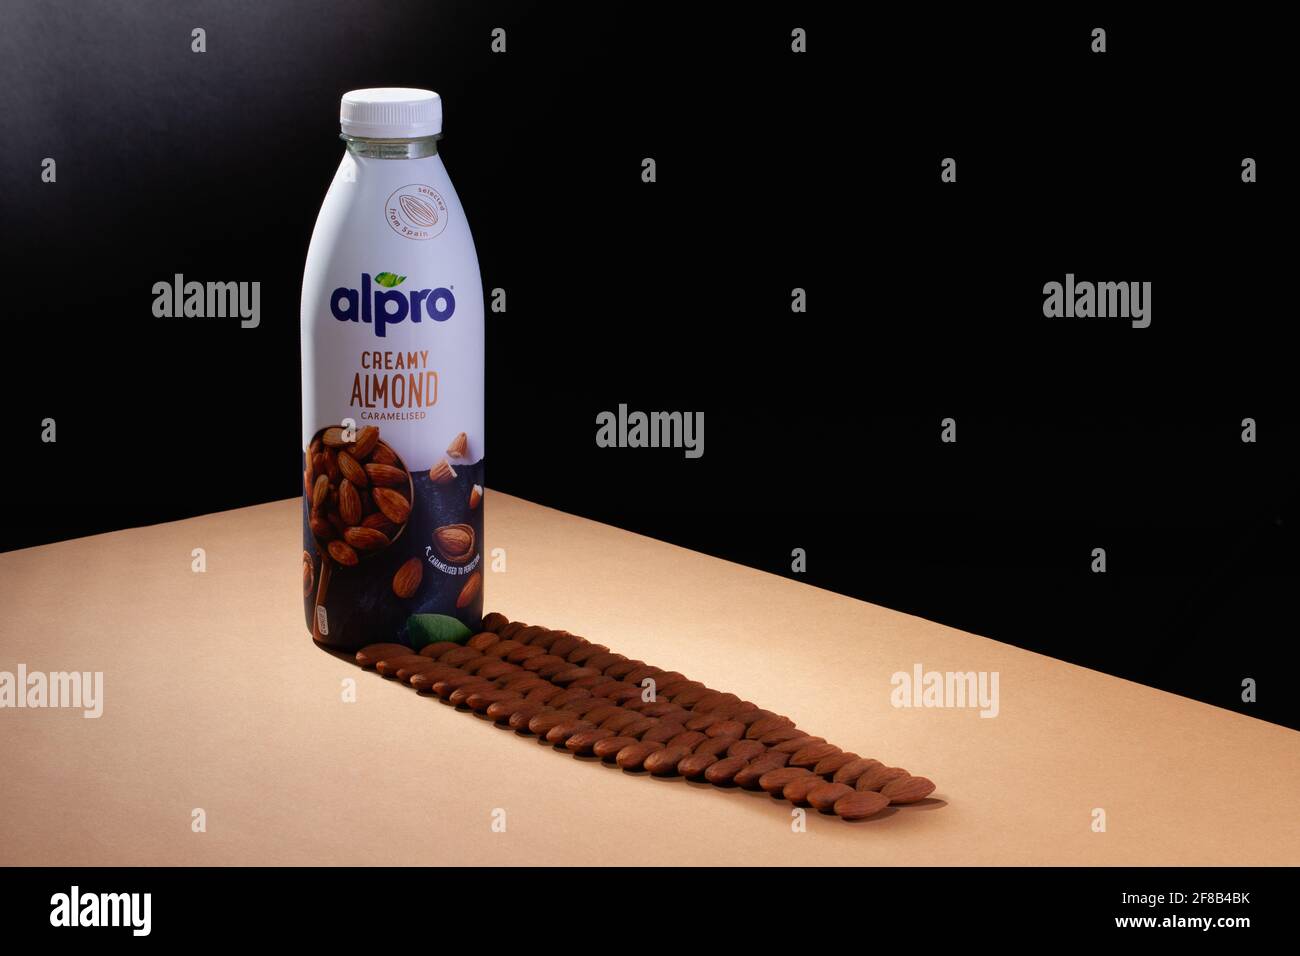 Alpro shadow Prague,Czech almonds almond markets company - is Republic organic of - Alpro drink Photo the 22 brown European Stock table. Alamy that on and a March,2021: